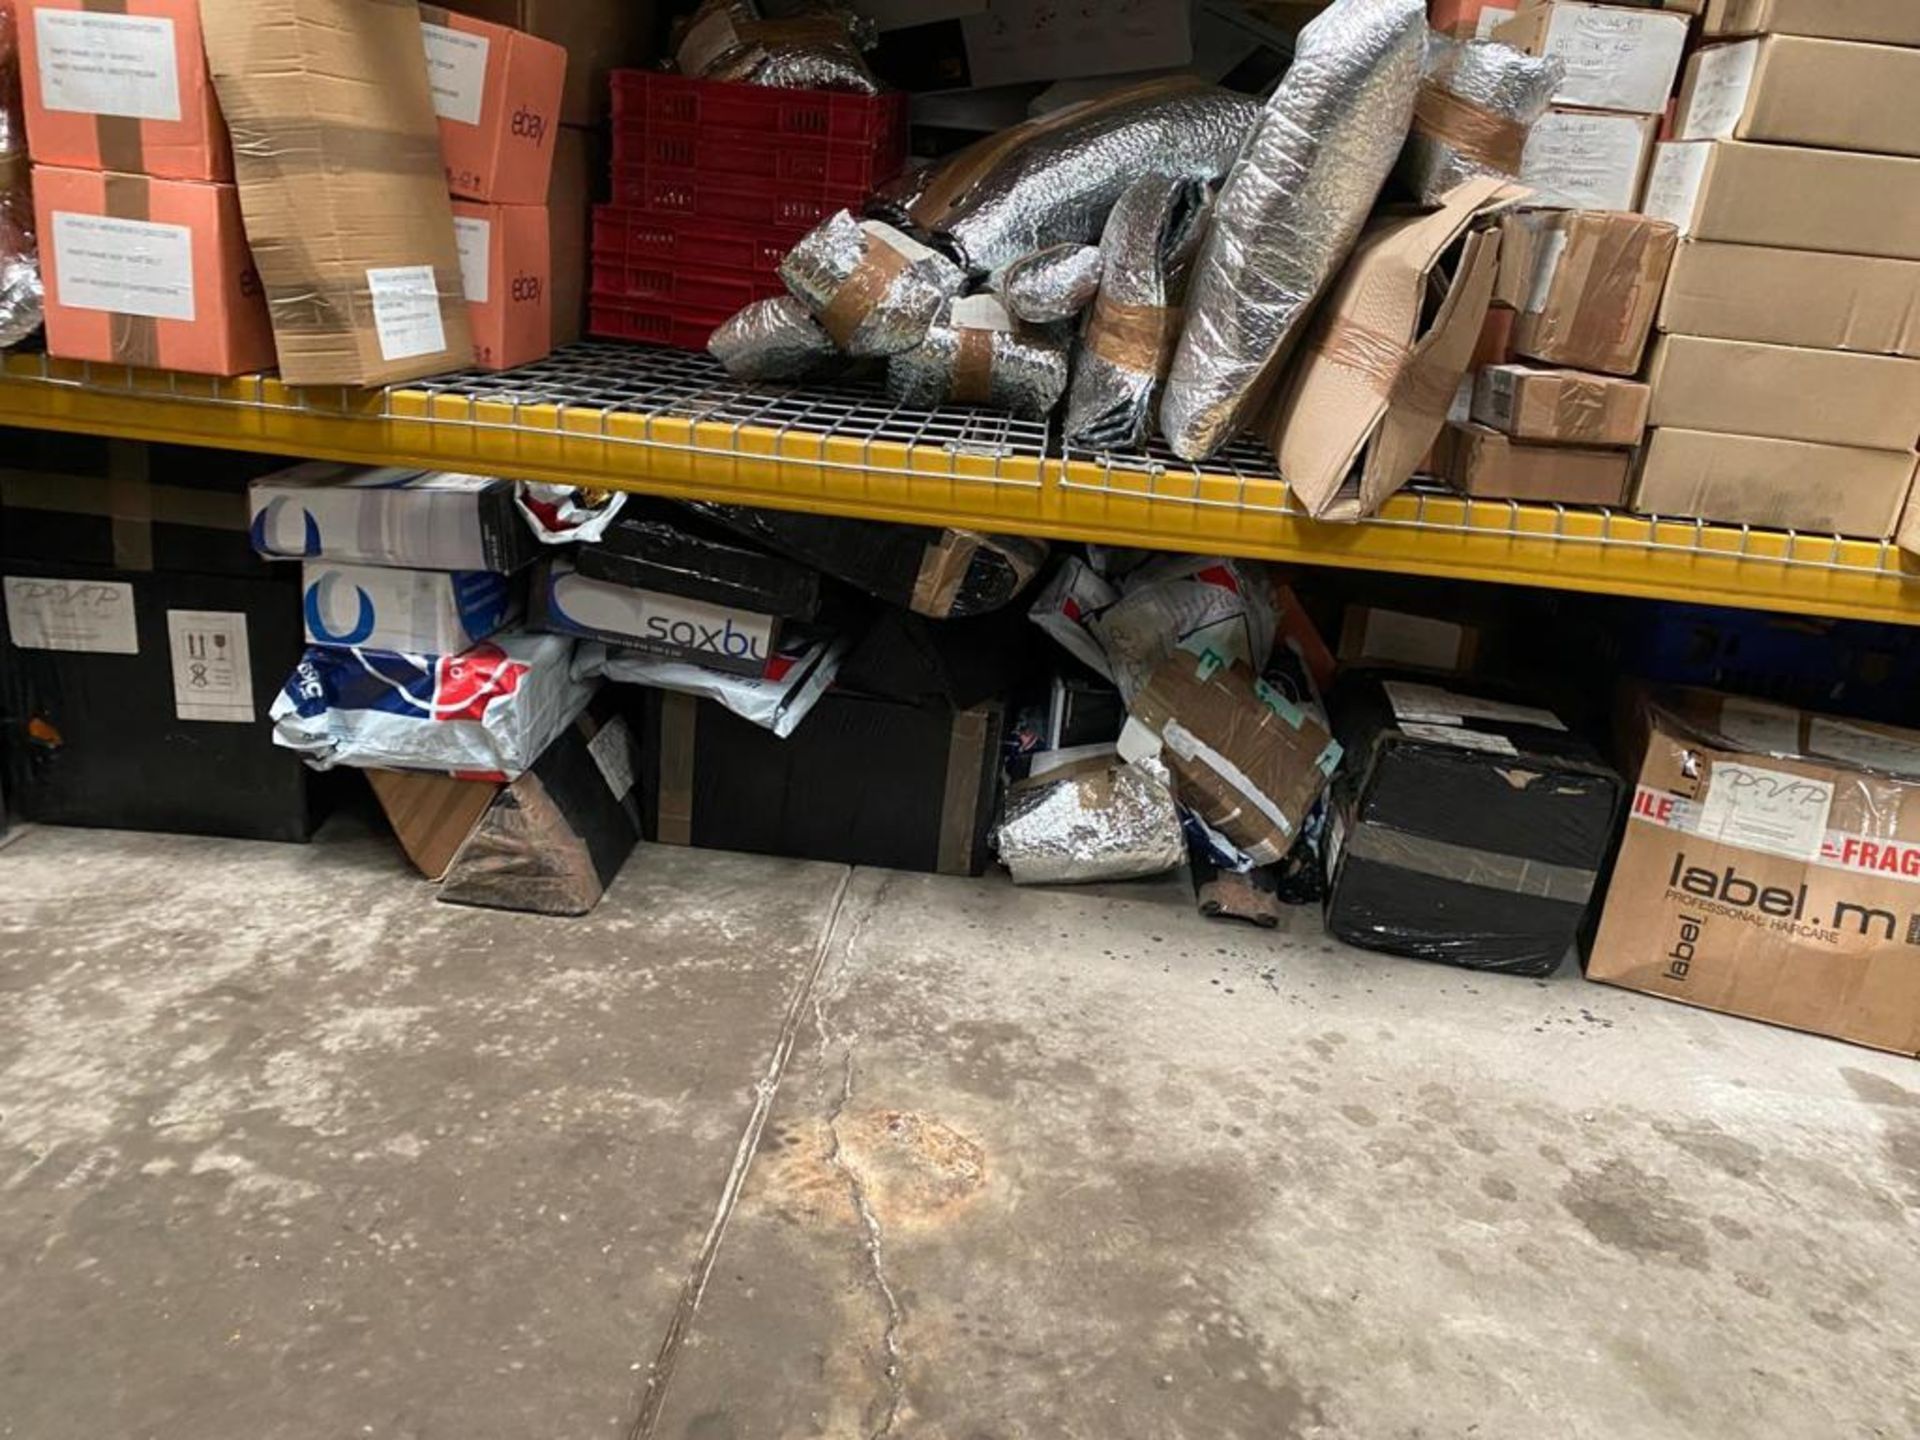 BULK ITEMS JOB LOT OF USED CAR PARTS - £350K ONGOING BUSINESS STOCK CLEARANCE FOR SALE! *NO VAT* - Image 66 of 95